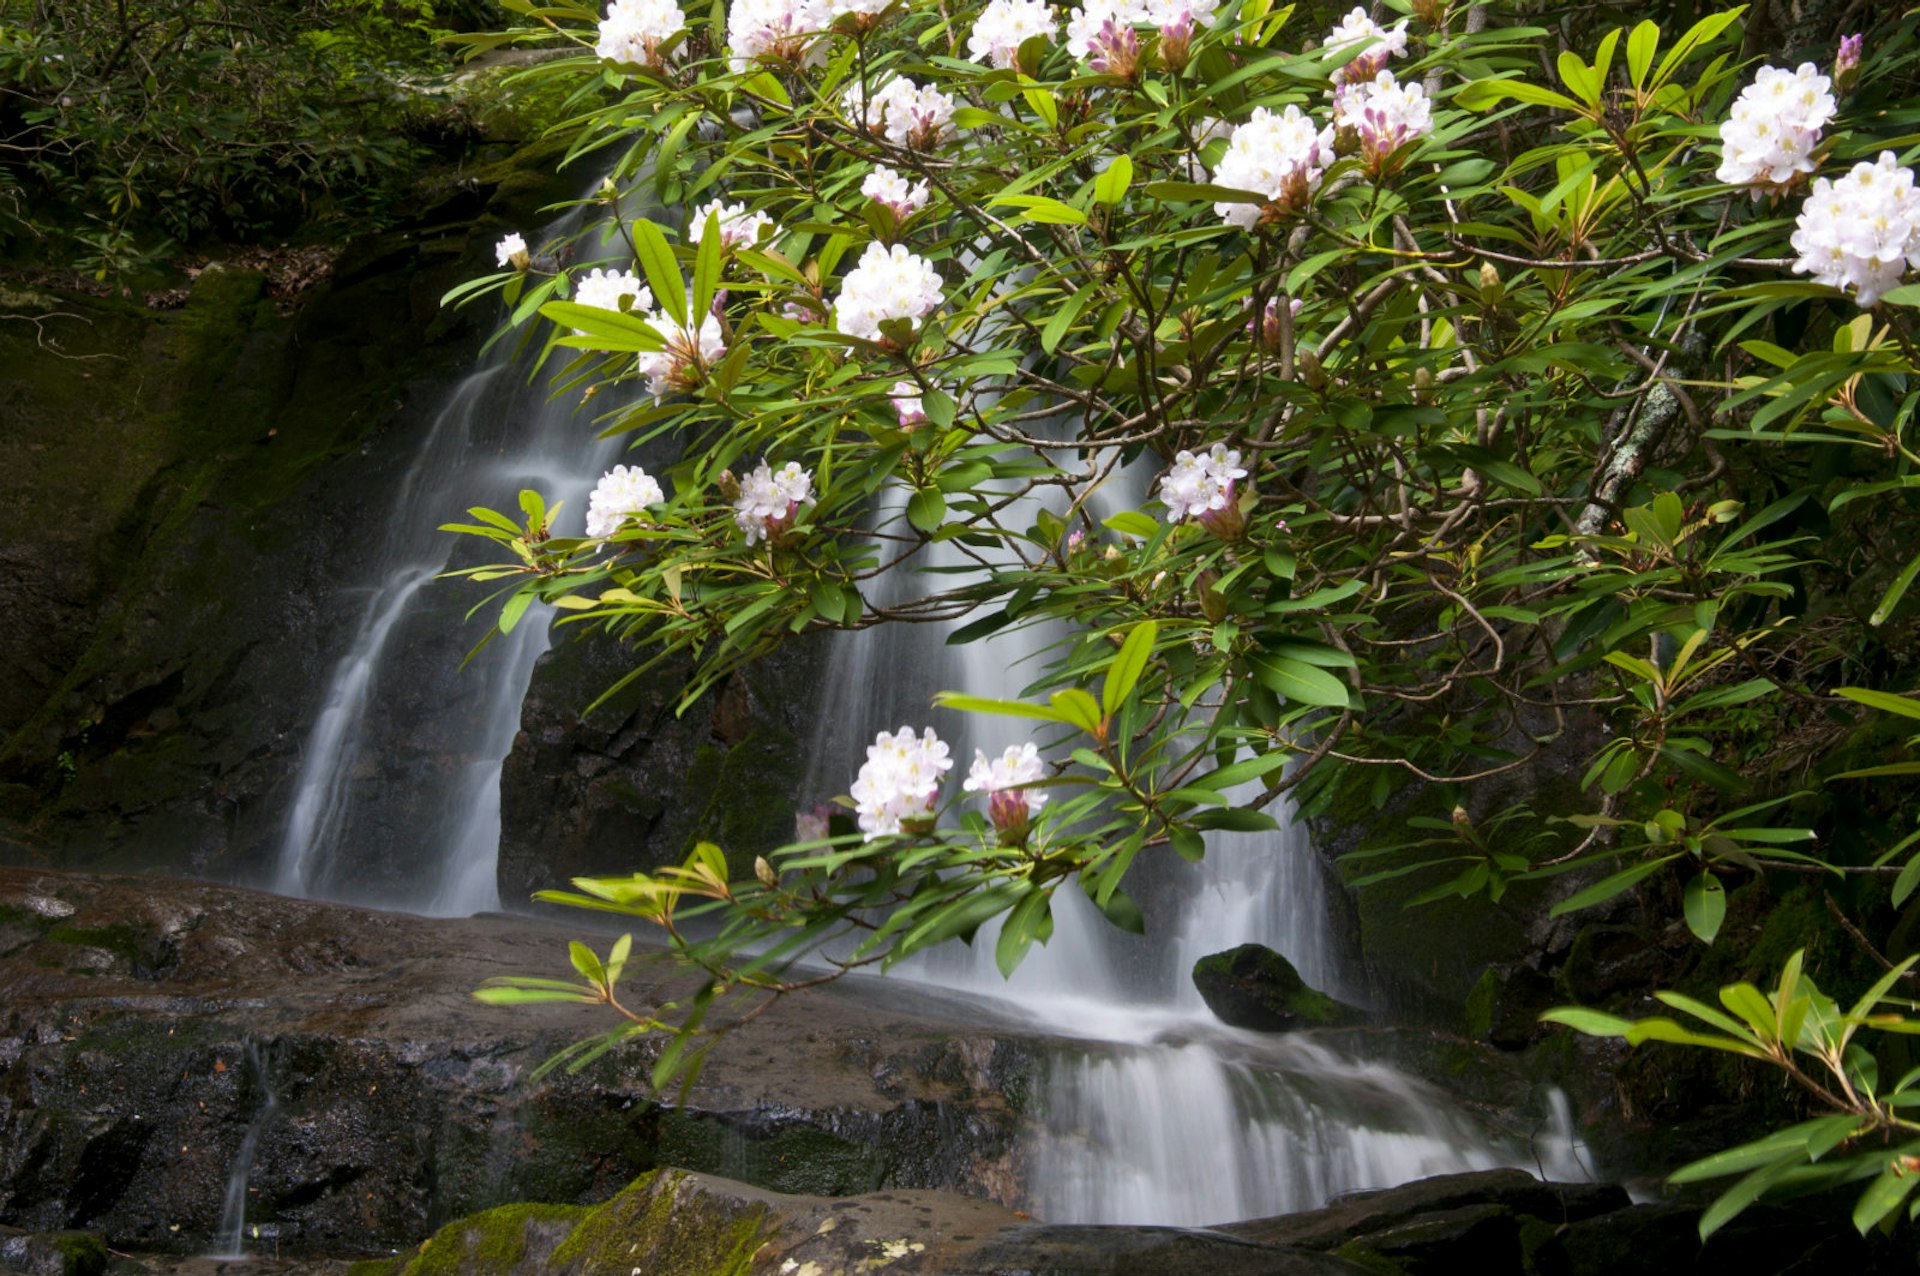 White flowers bloom on a tree that hangs over a gently cascading waterfall. National Parks: The best free things to do in the US parks